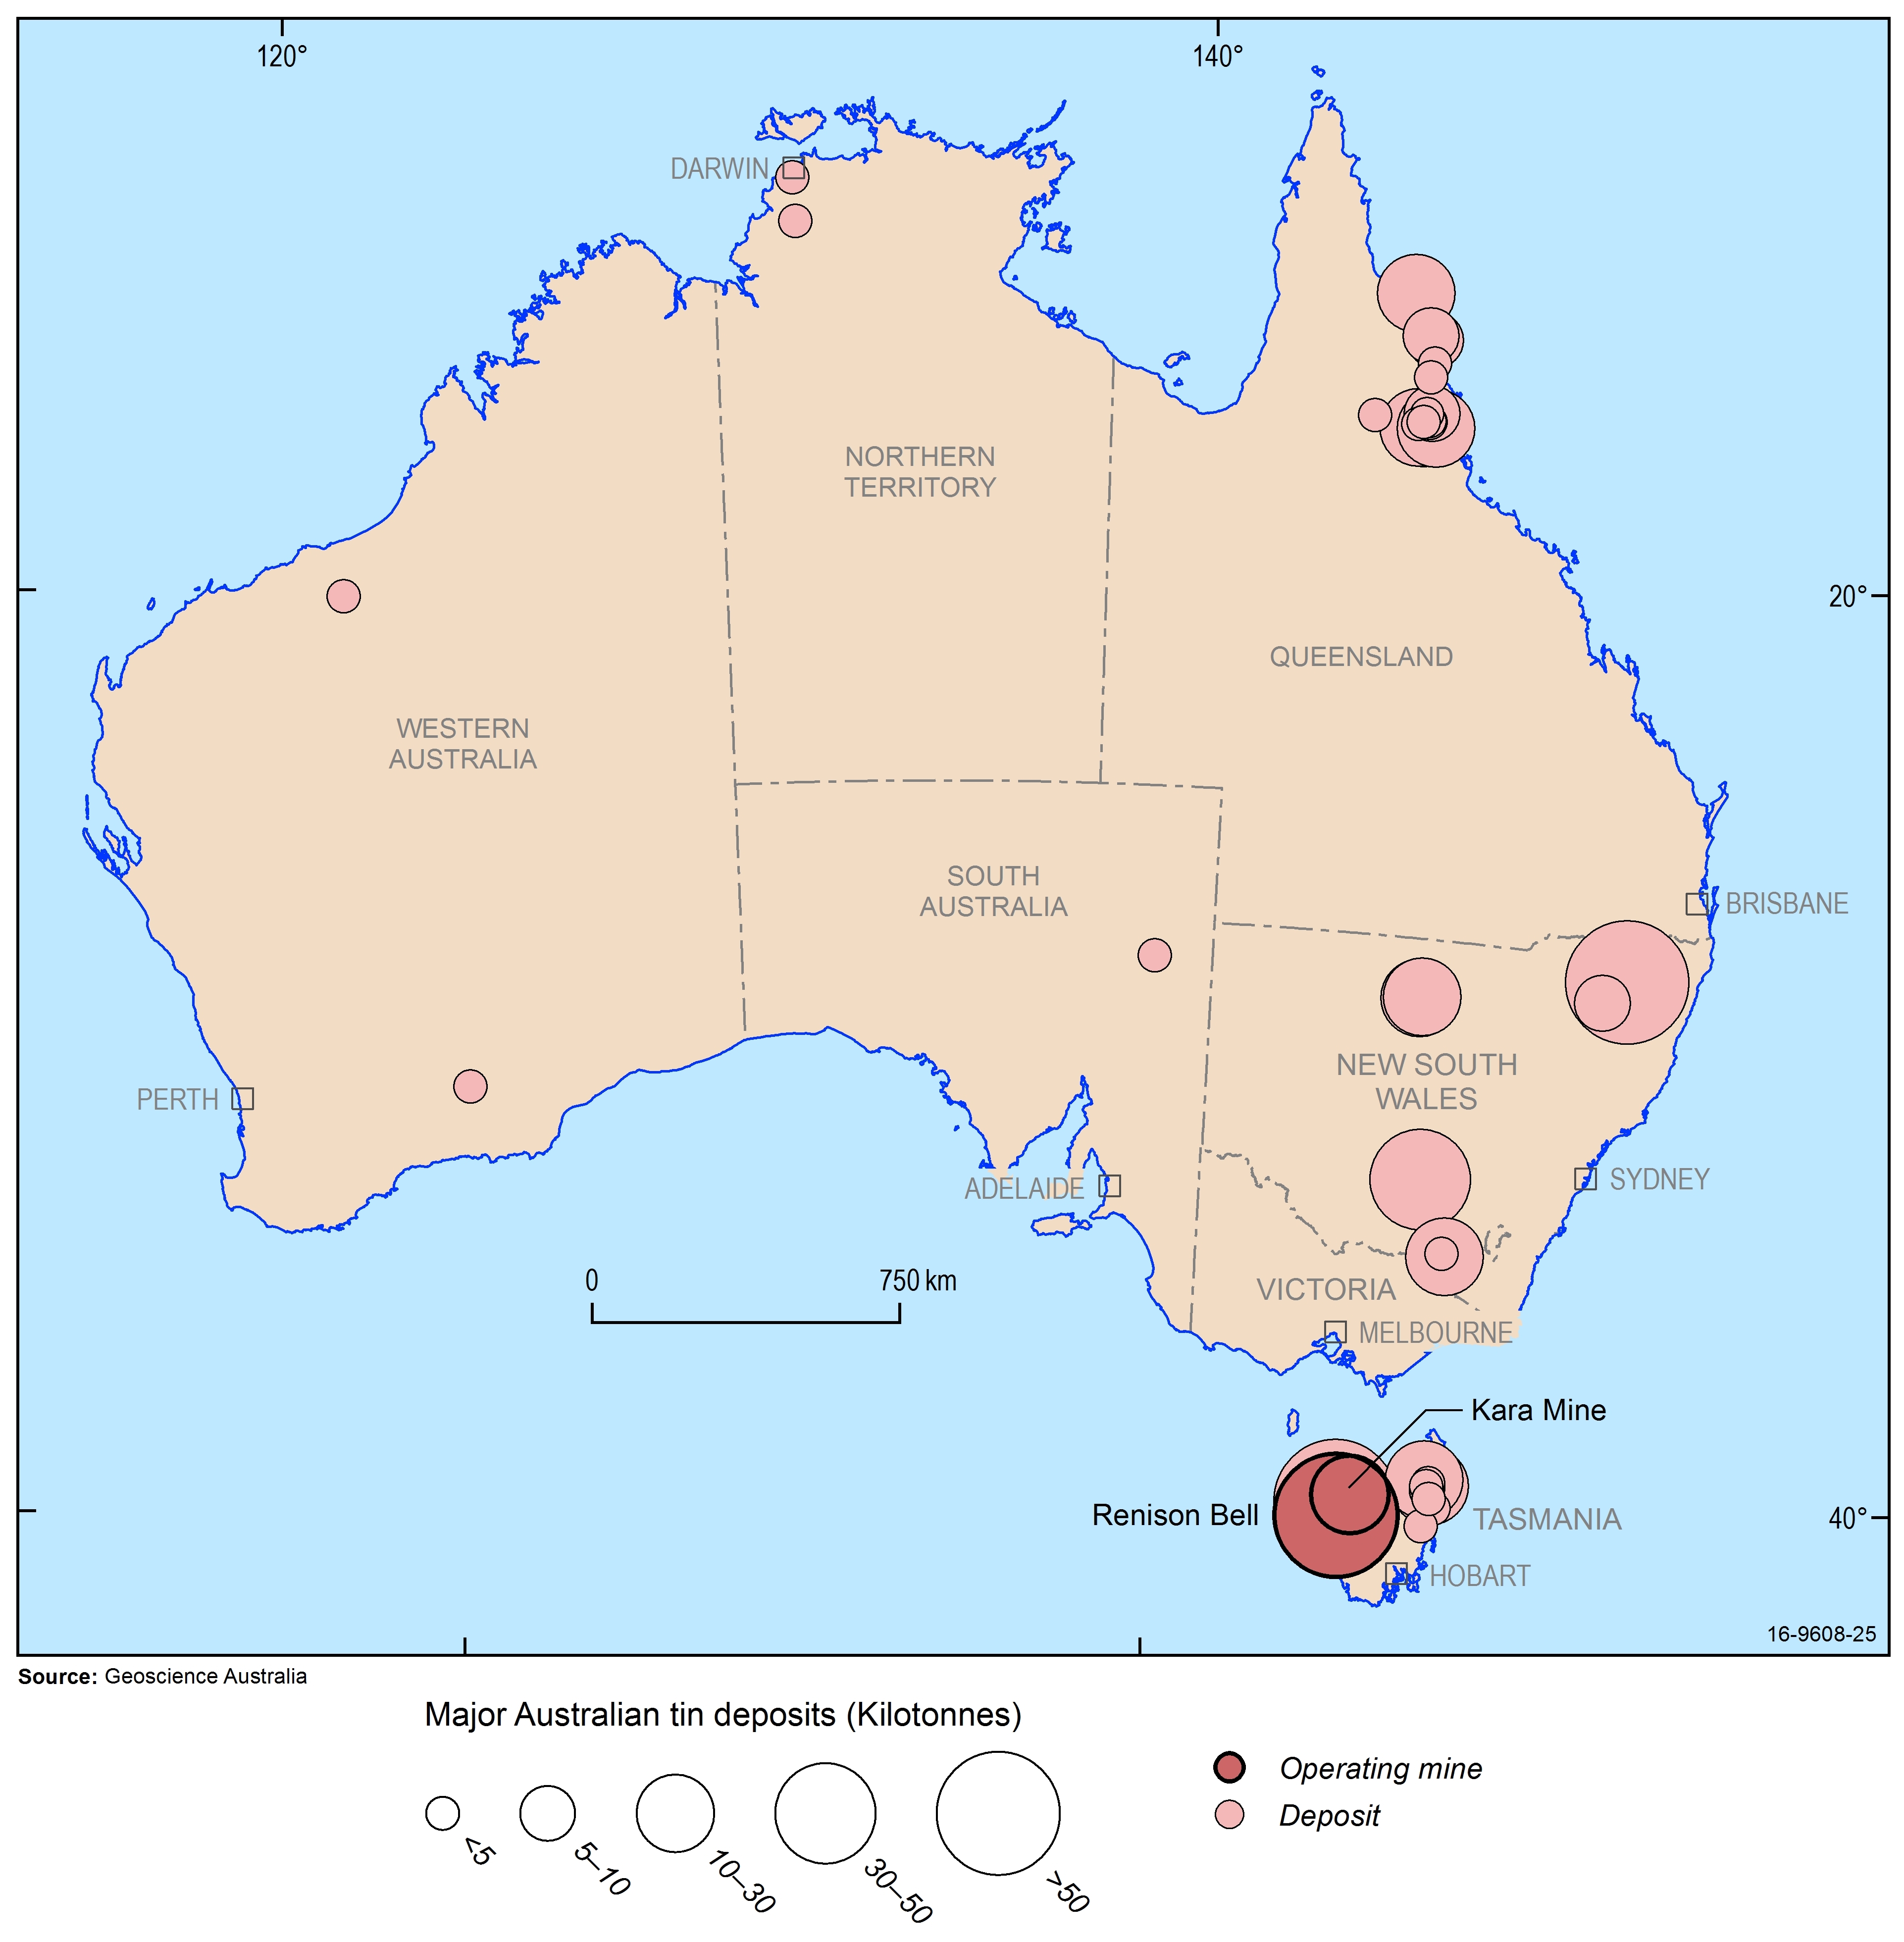 Map of Australia indicating locations of major tin deposits and mines